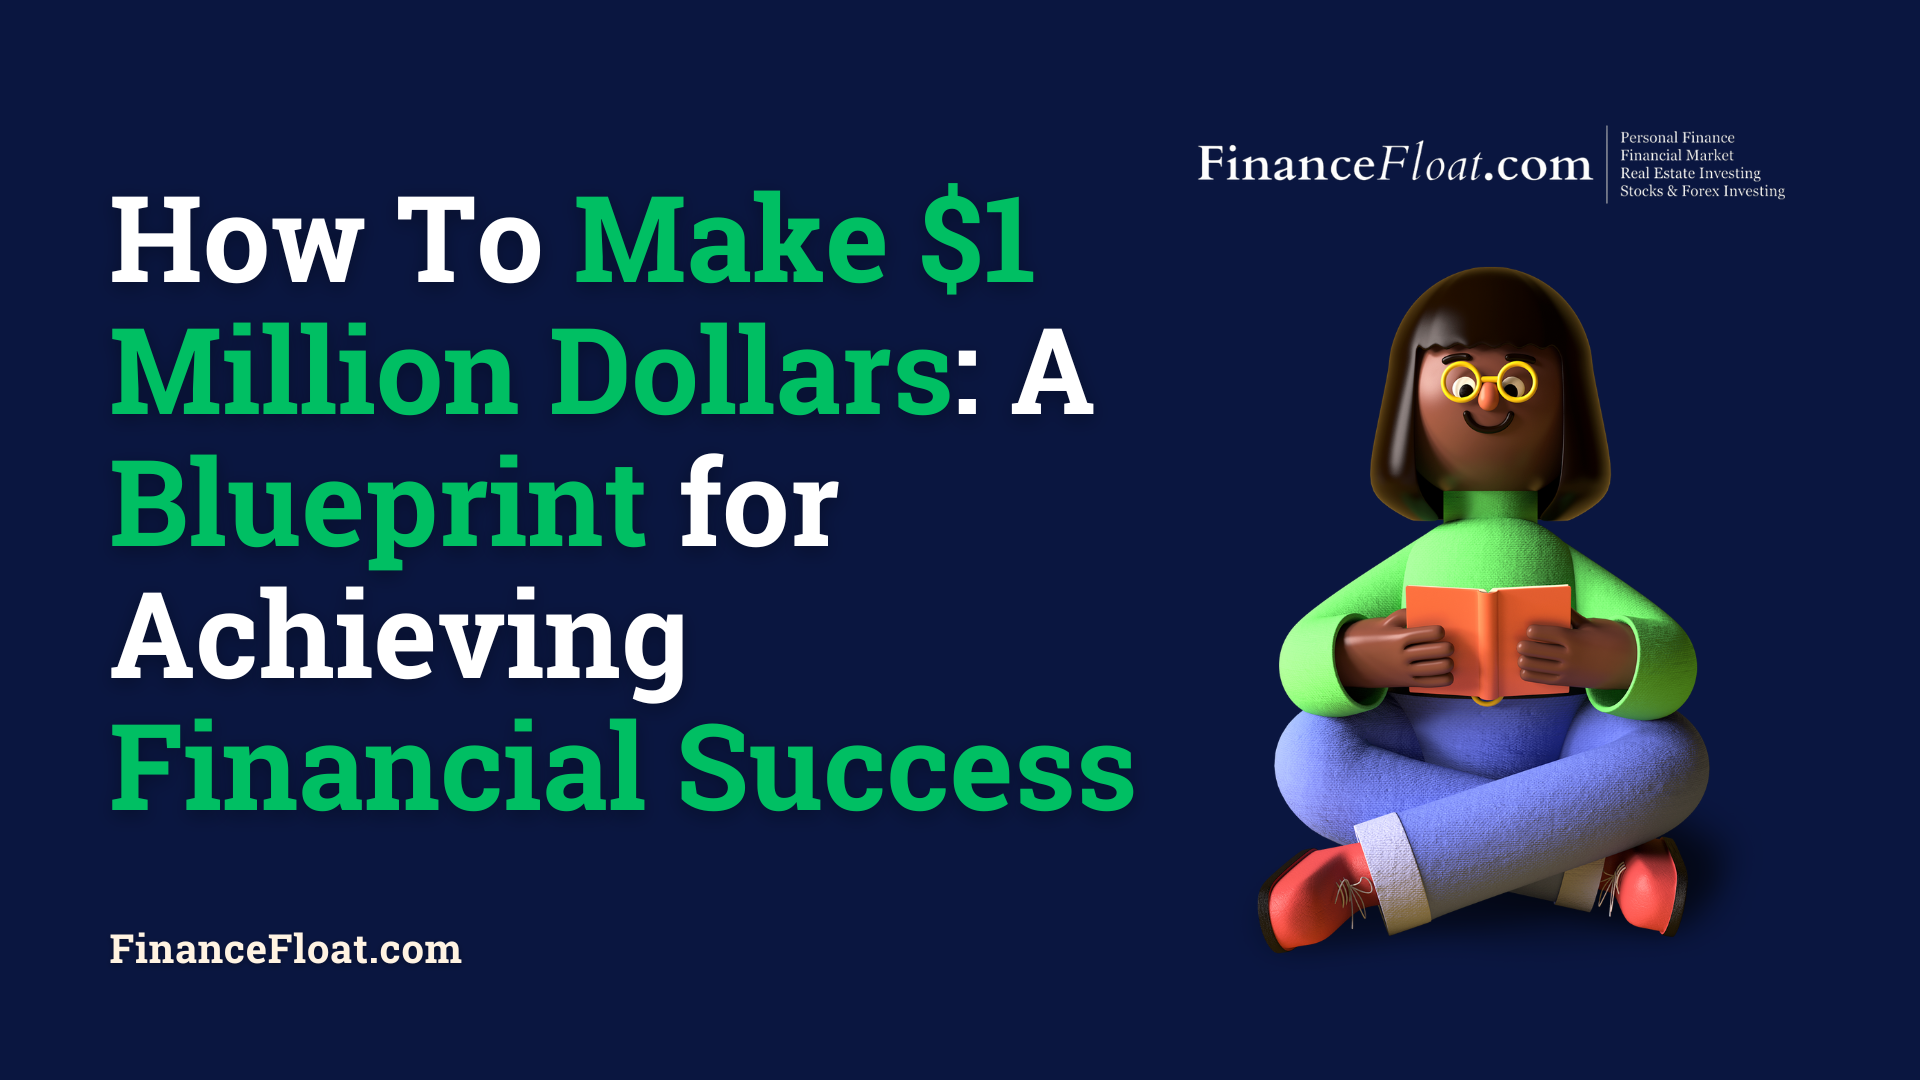 How To Make $1 Million Dollars A Blueprint for Achieving Financial Success